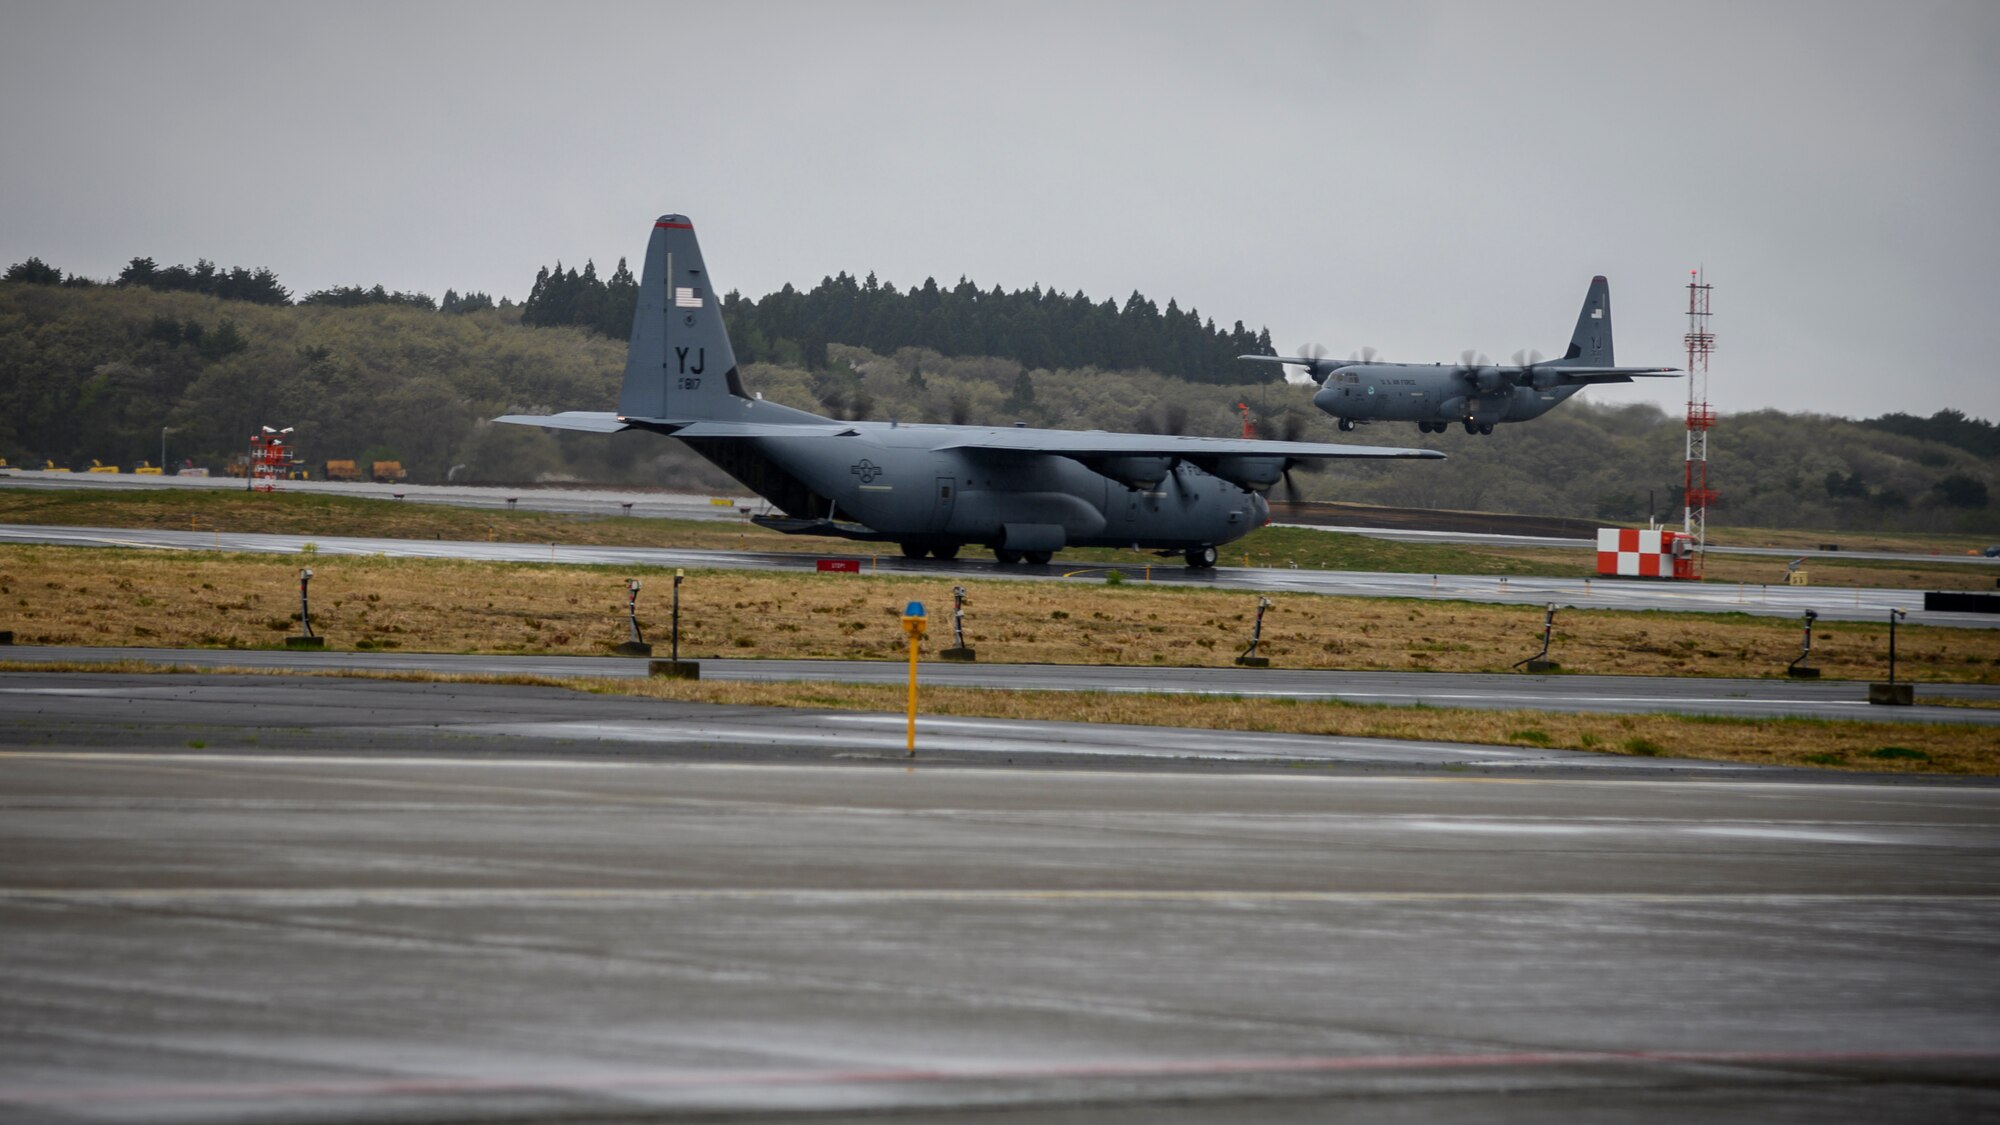 A C-130J Super Hercules from the 374th Airlift Wing lands while the other C-130 taxis down the runway during the Beverly Sunrise 21-05 Readiness Exercise at Misawa Air Base, Japan, May 2, 2021. The C-130s are transporting cargo and personnel to support the 35th Fighter Wing’s Agile Combat Employment capabilities. (U.S. Air Force photo by Airman 1st Class China M. Shock)